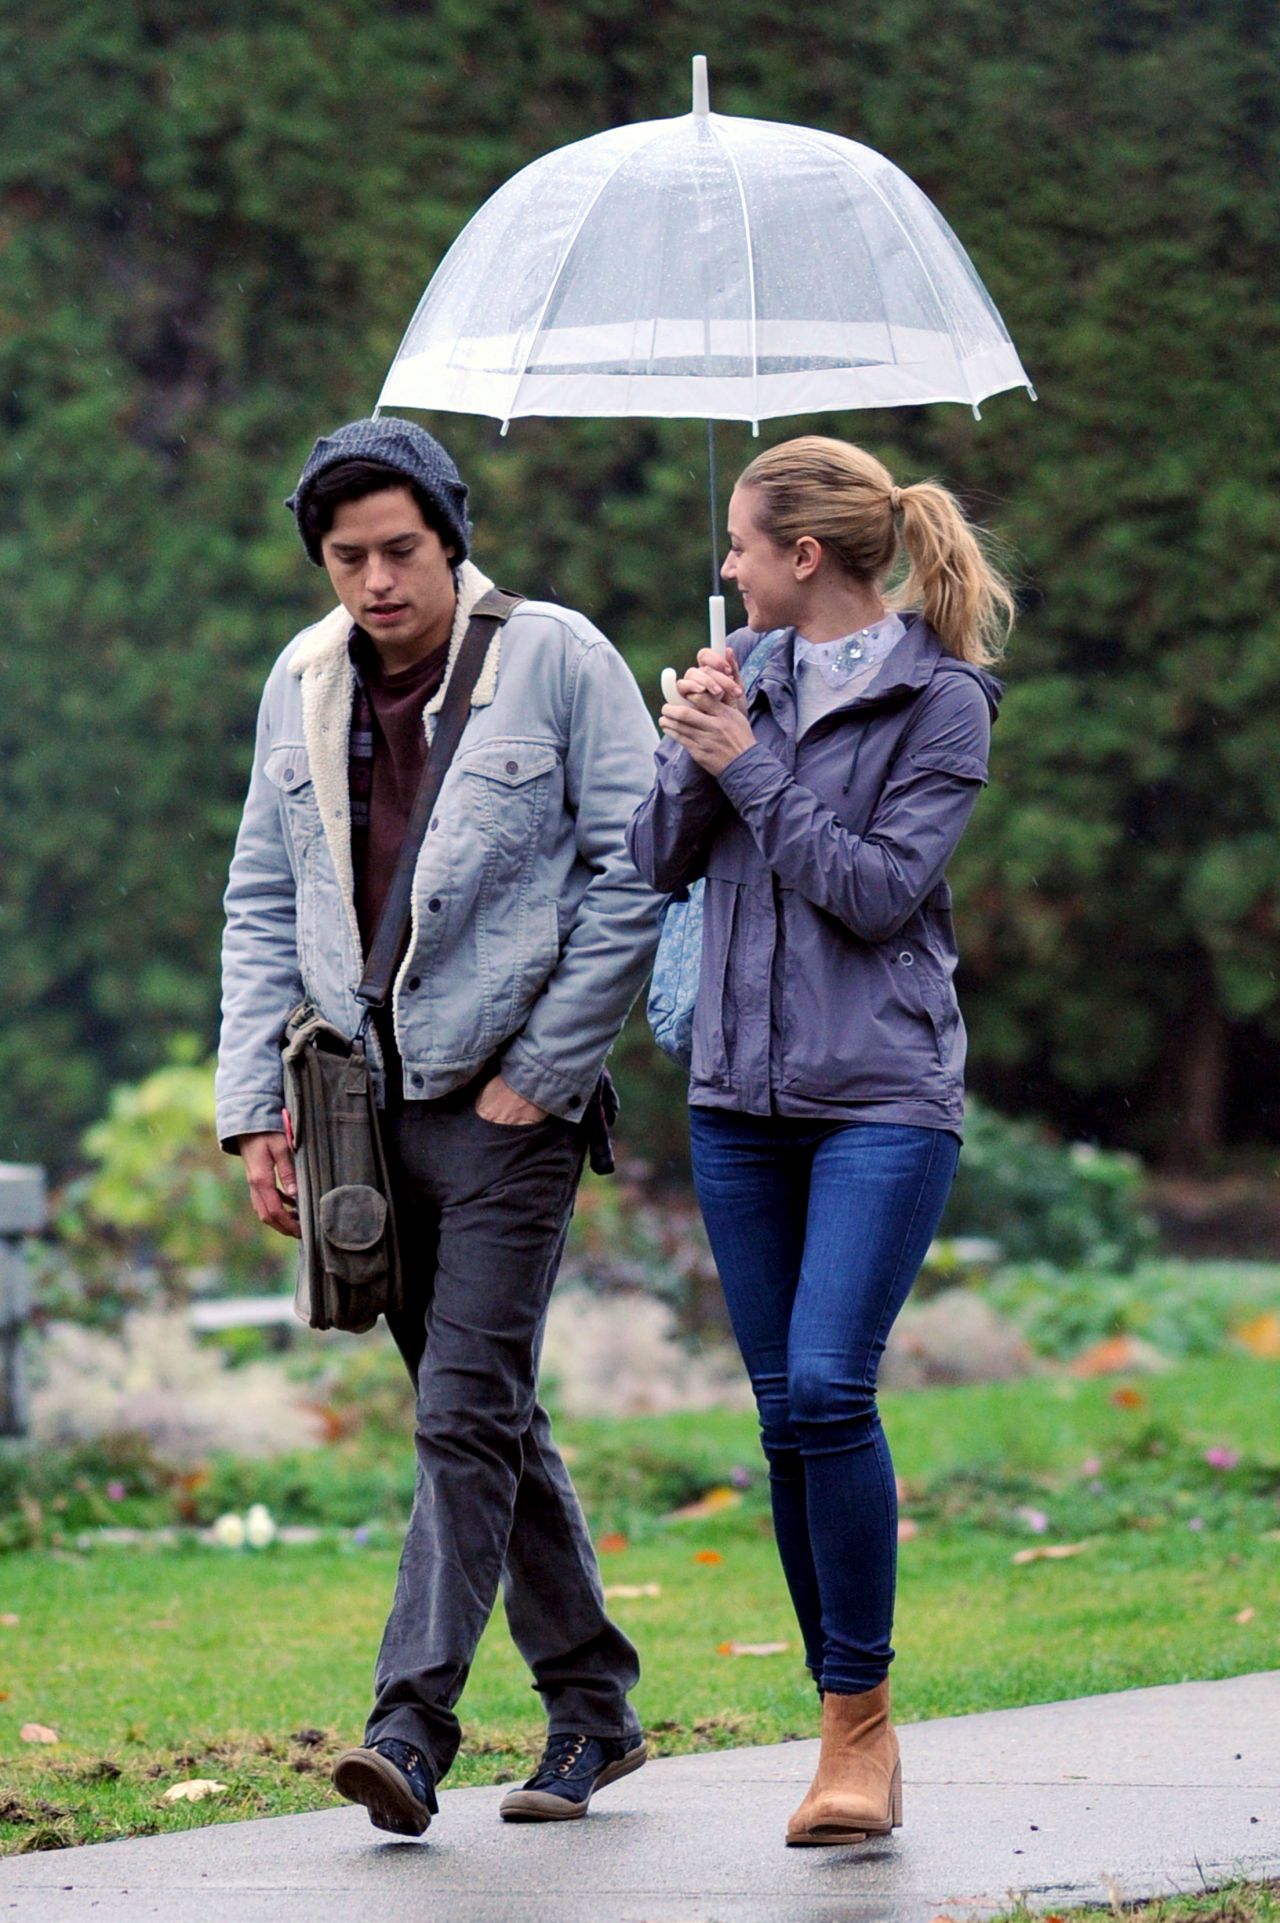 lili-reinhart-and-cole-sprouse-filming-an-episode-of-riverdale-in-vancouver-11-14-2017-2.jpg